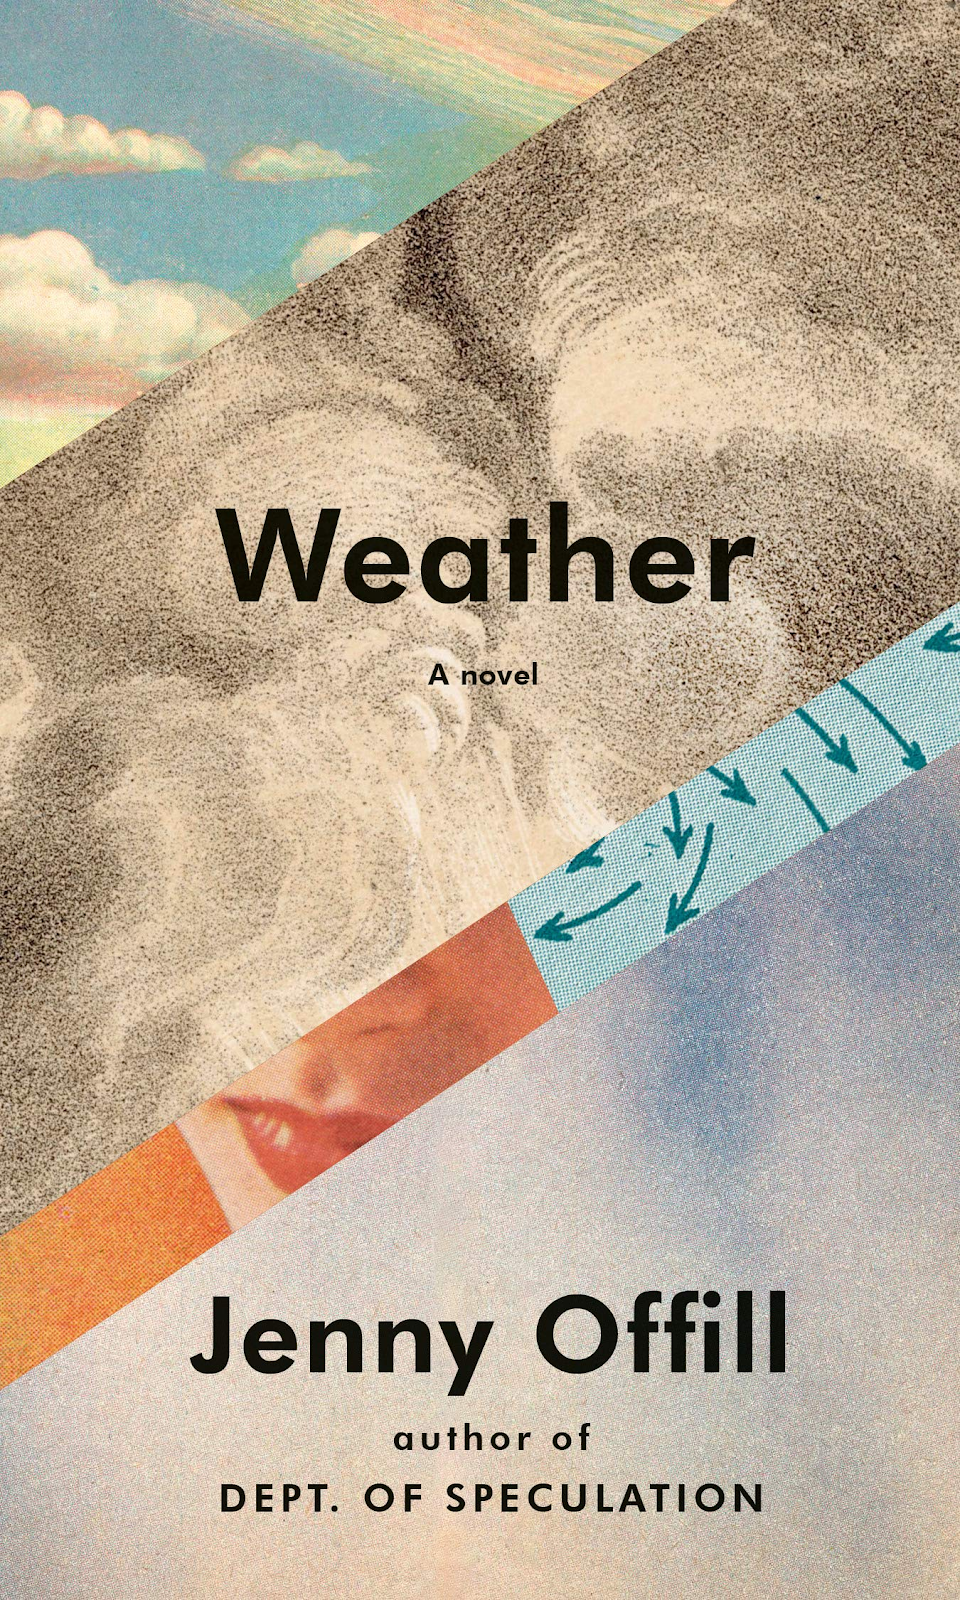 Weather, by Jenny Offill